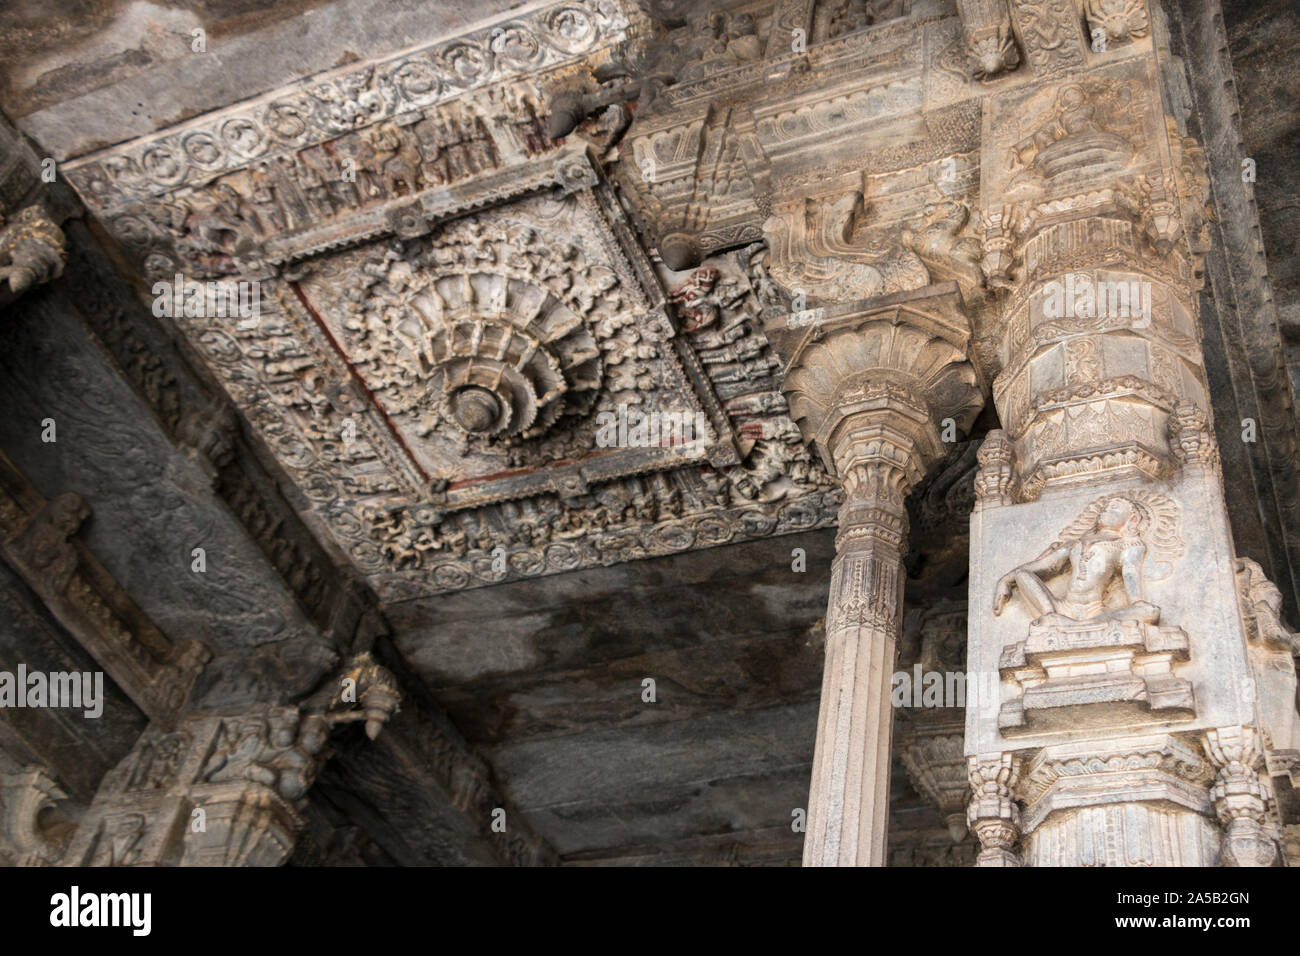 Ceiling of Fort Vellore Hindu Temple showing fine sculpture and Hindu Gods, with a column on the right. India Vellore September 2019 Stock Photo